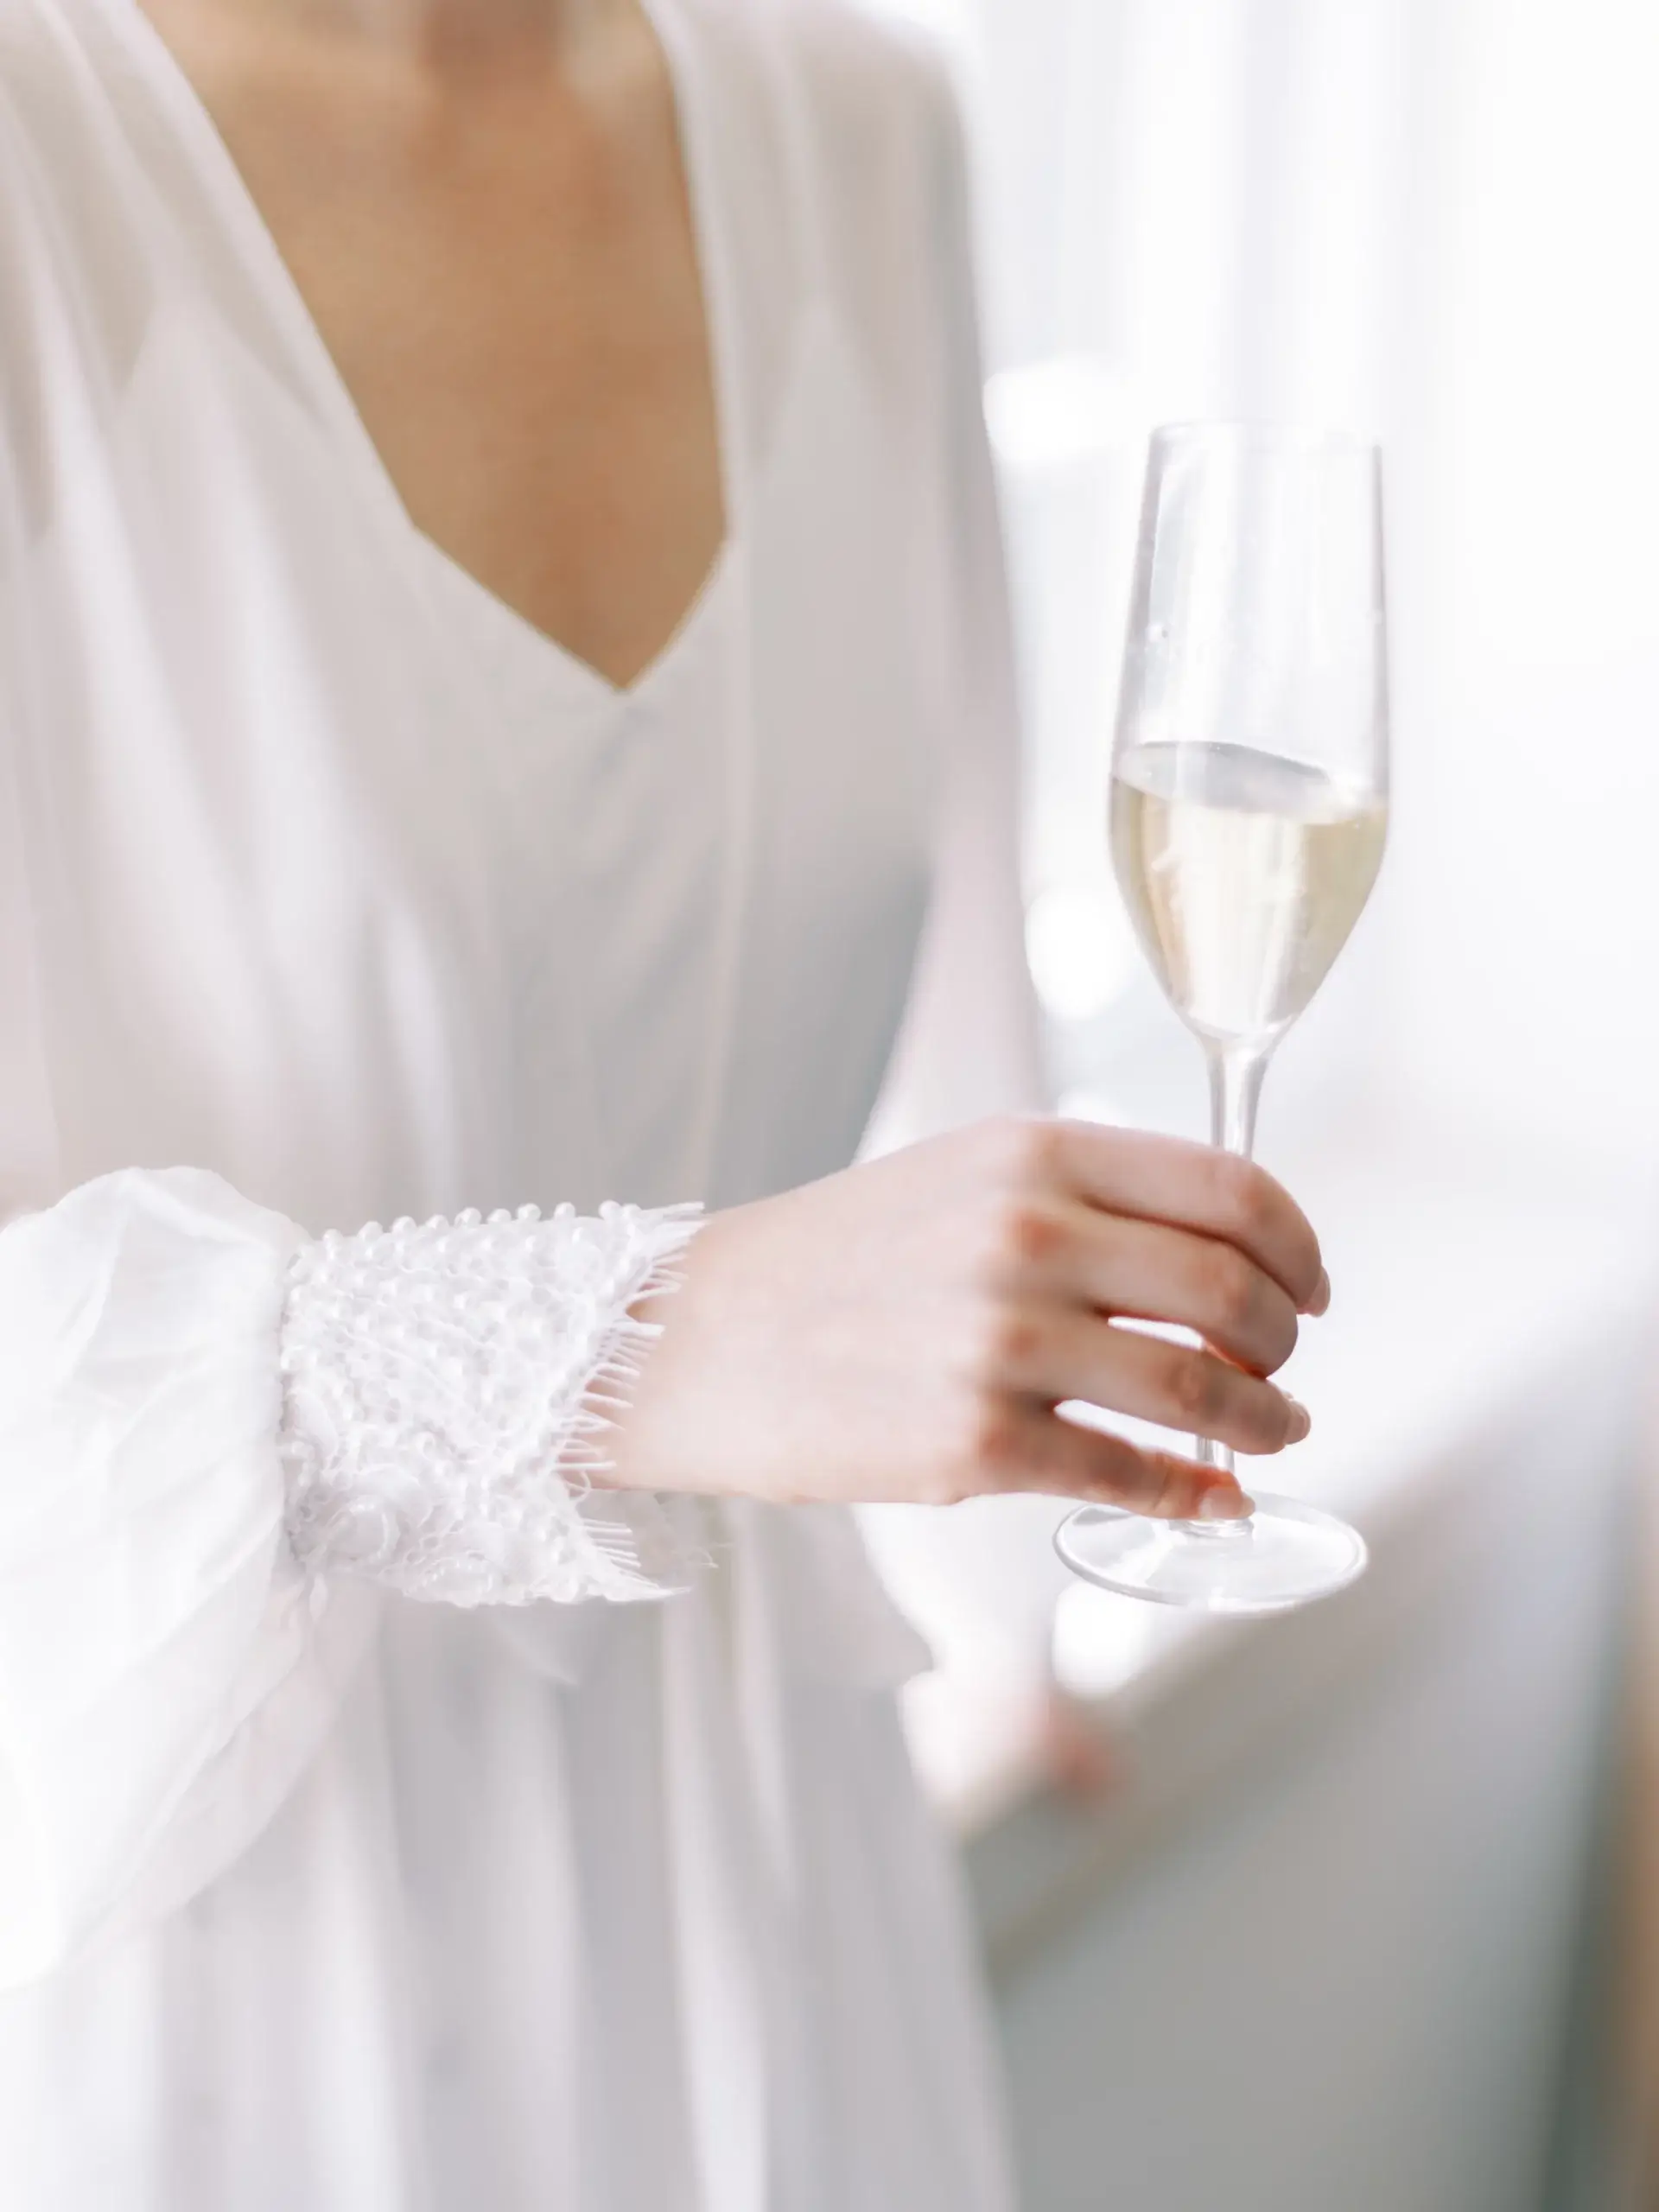 Wedding Website Design: Essential Tips for Converting Visitors into Clients